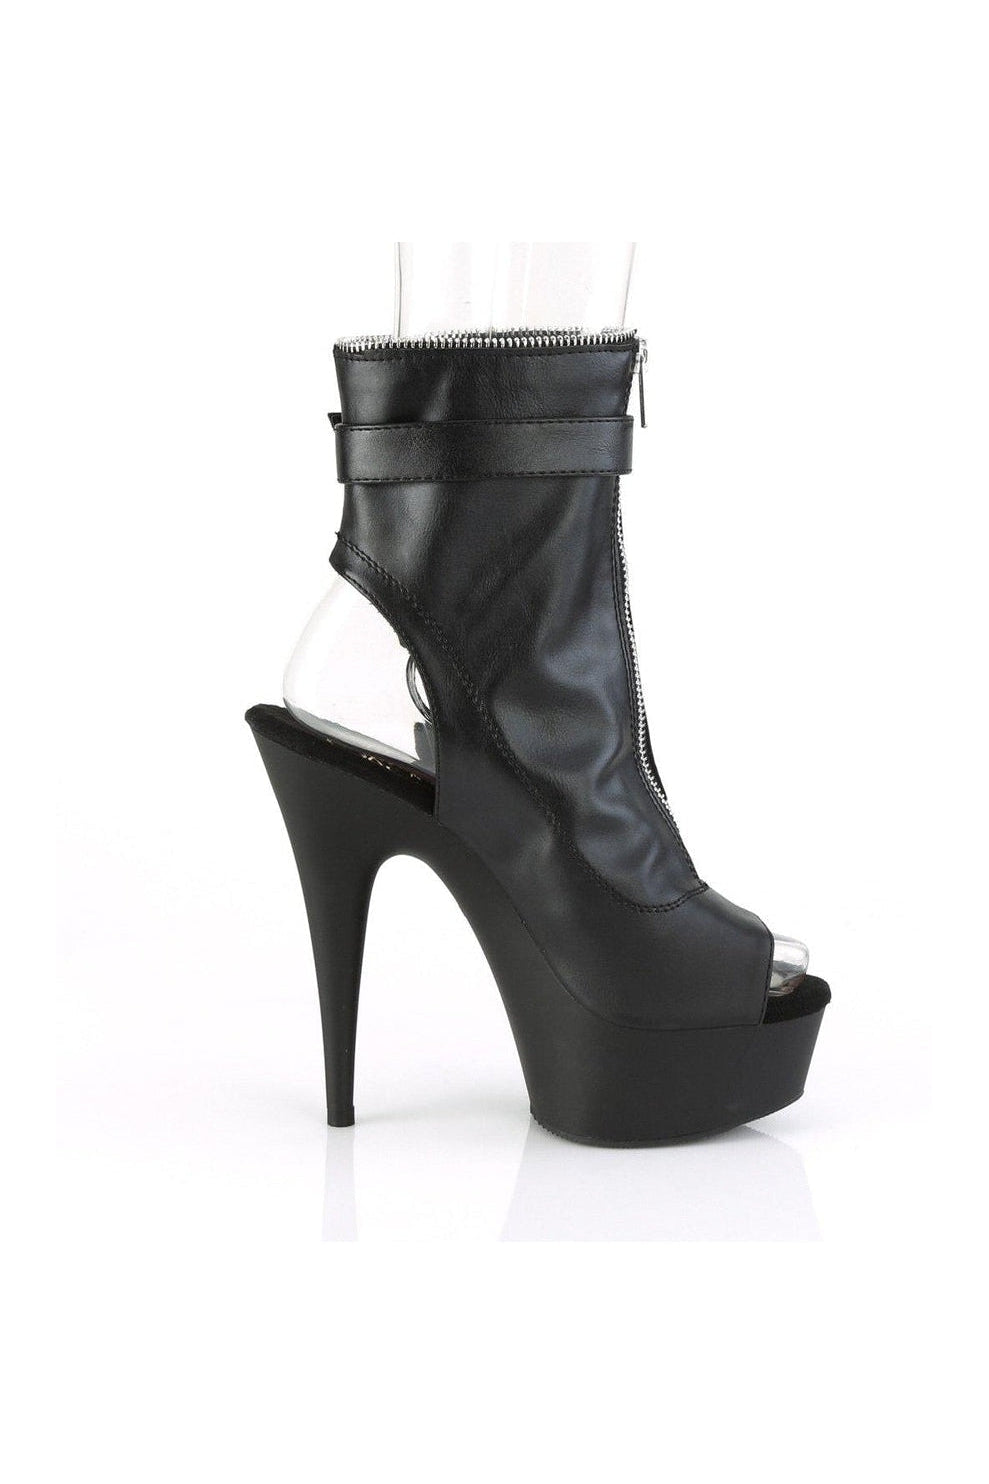 DELIGHT-1035 Exotic Ankle Boot | Black Faux Leather-Ankle Boots-Pleaser-SEXYSHOES.COM